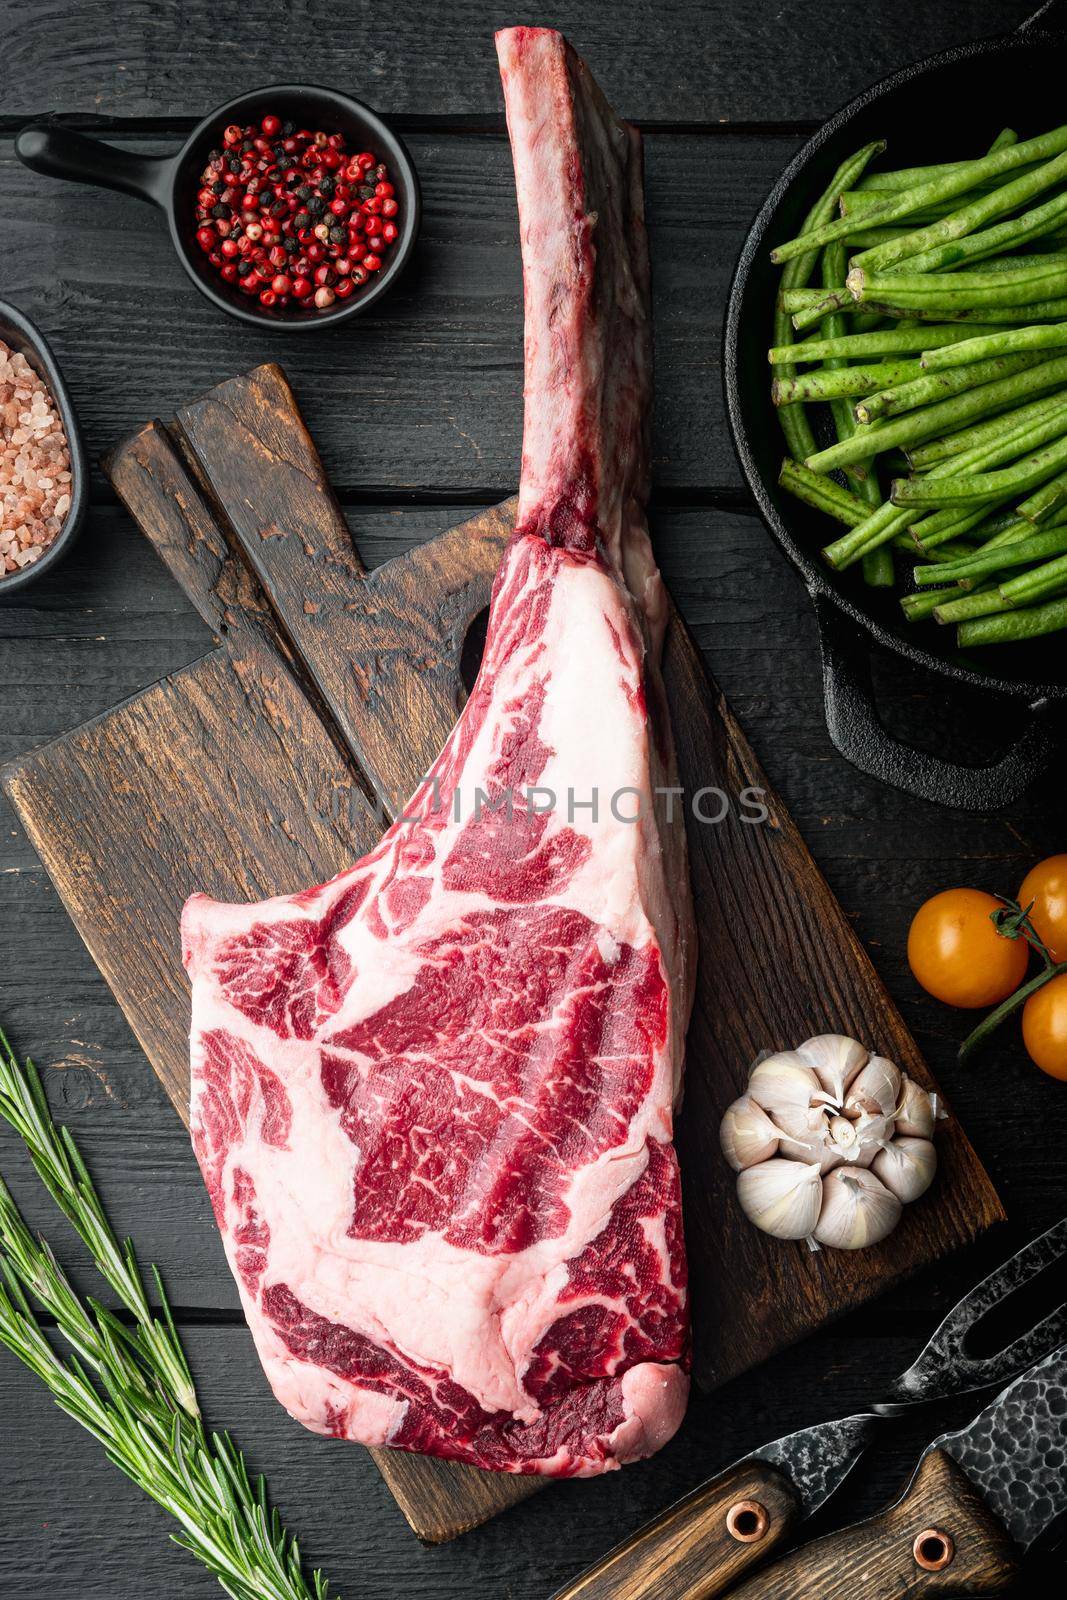 Uncooked raw beef red meat marbled with bone in, with grill ingredients, on black wooden table background, top view flat lay by Ilianesolenyi